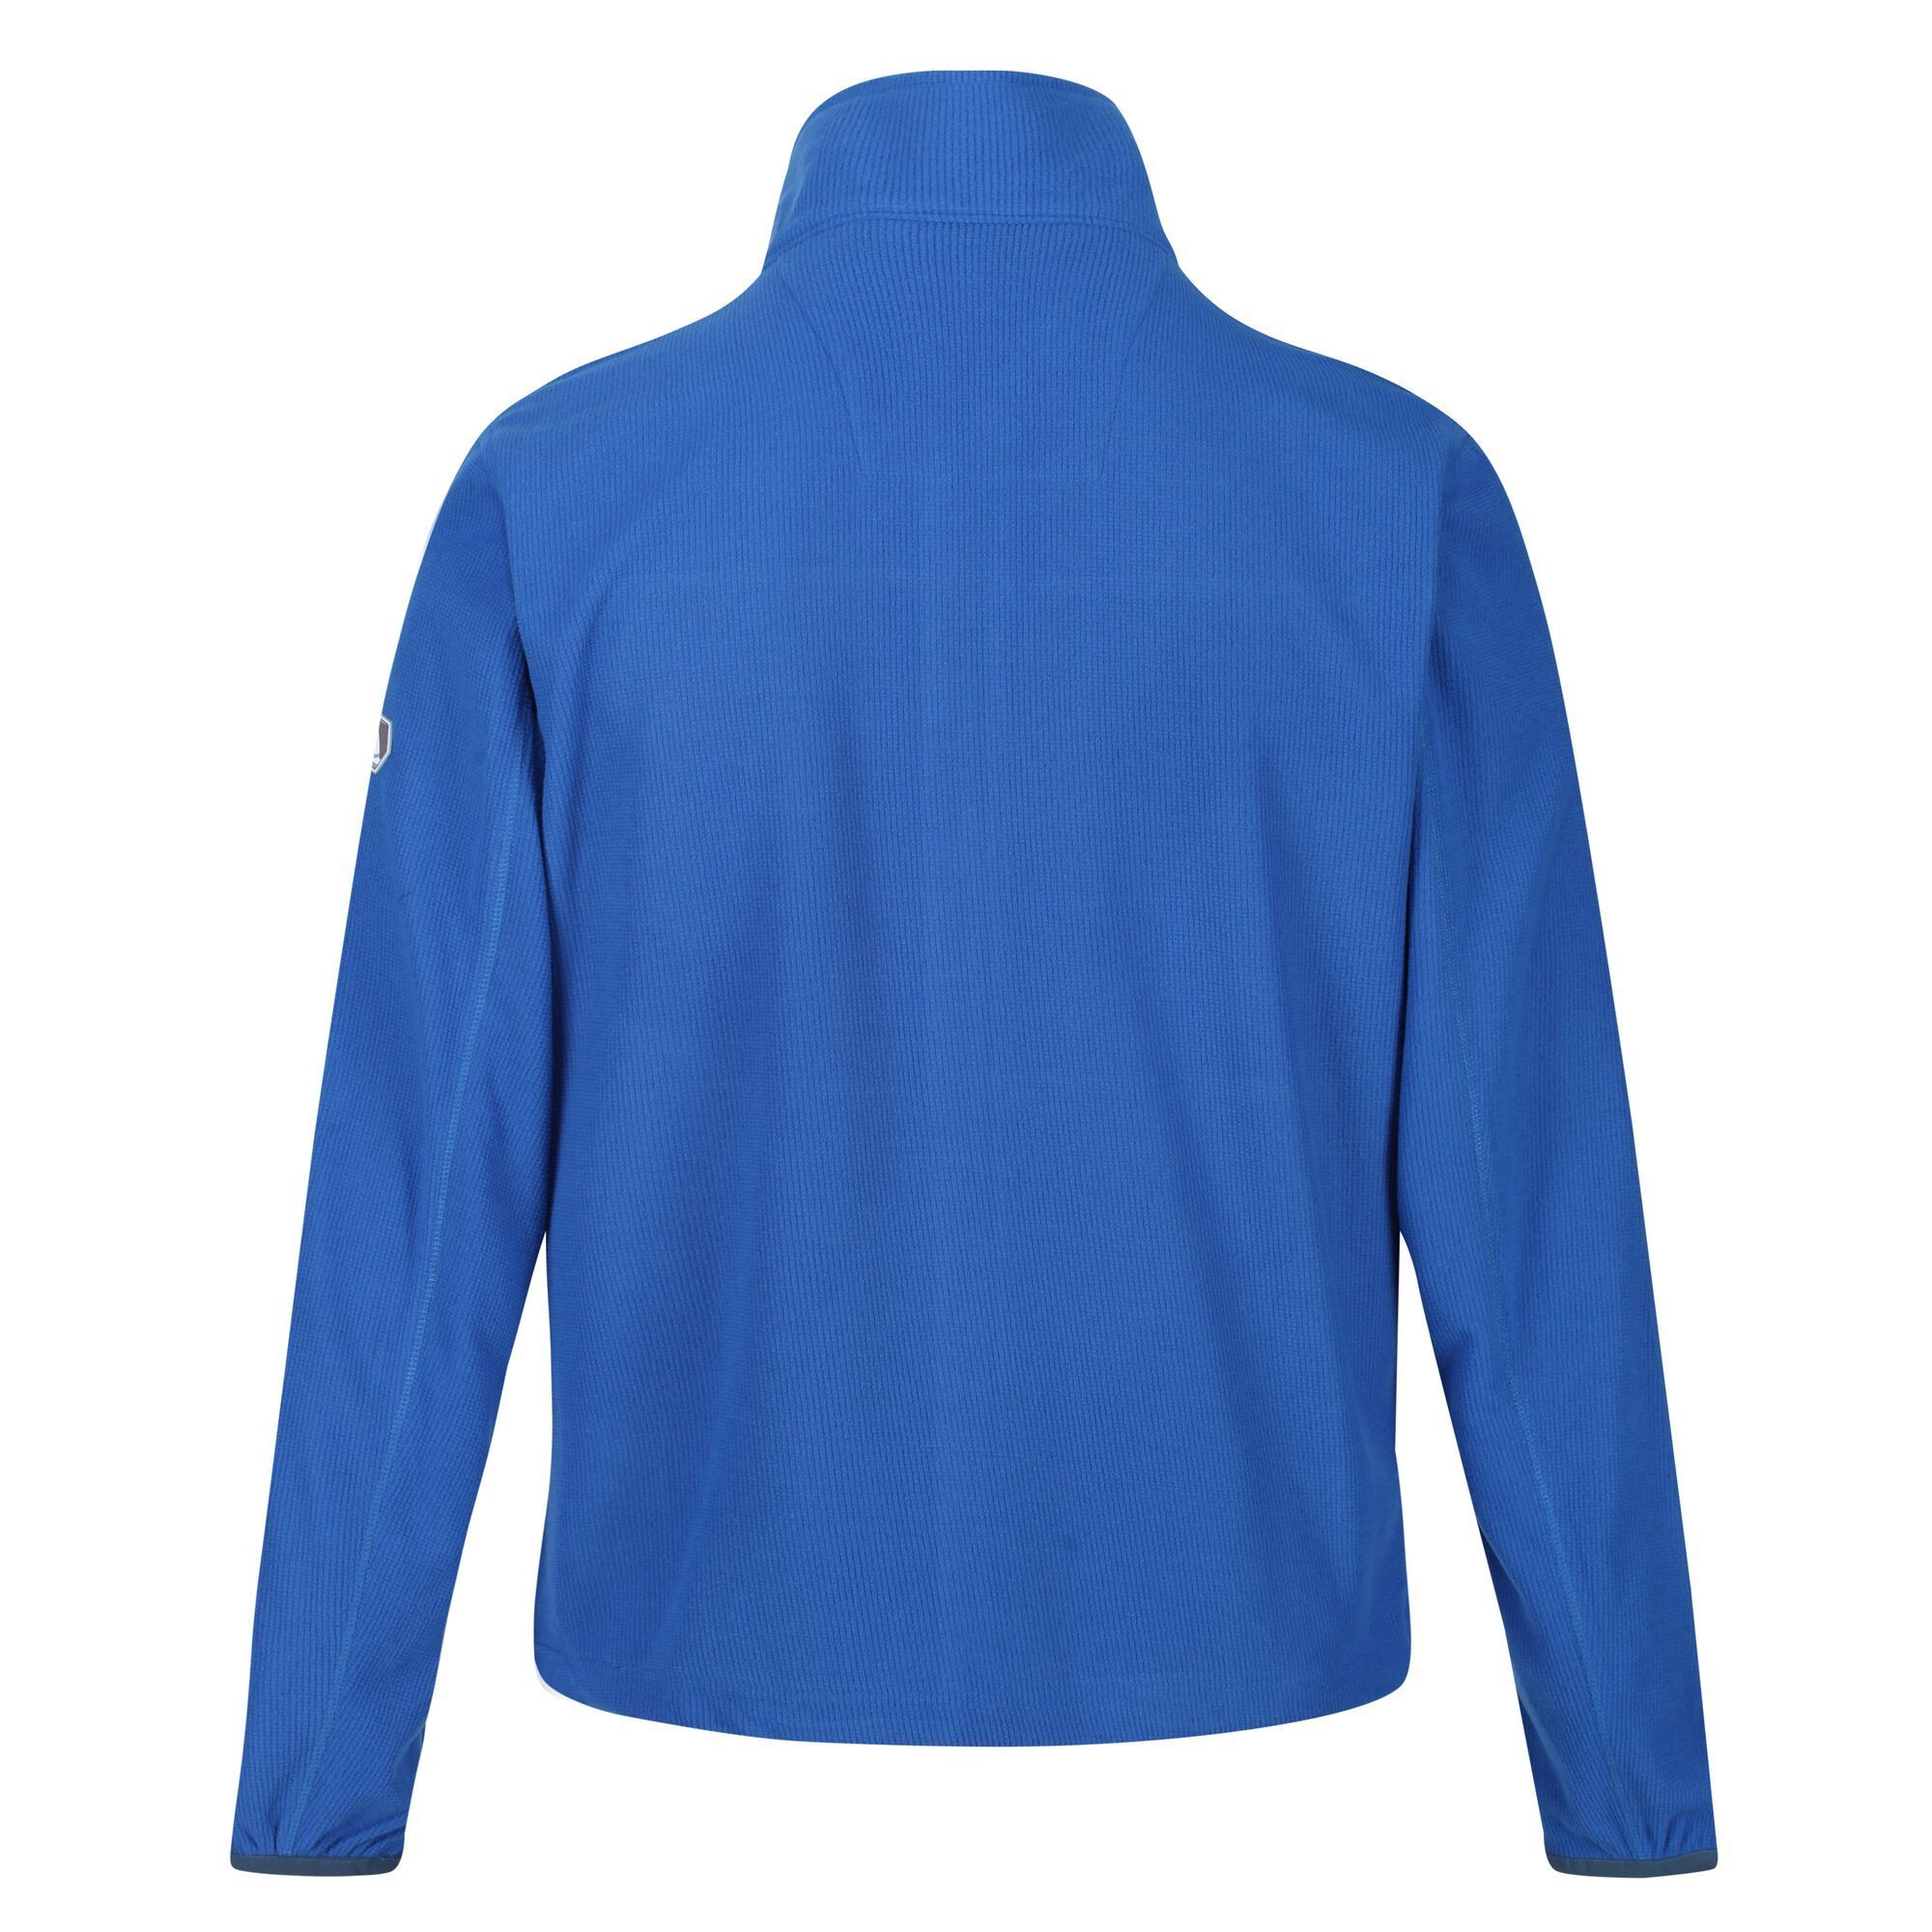 Material: 100% Polyester. Zip sweater with 180gsm mini-grid fleece fabric with one side brushed. Stand collar, adjustable shock-cord hem and stretch binding. 2 zipped lower pockets. Regatta outdoors logo embroidery on the chest.